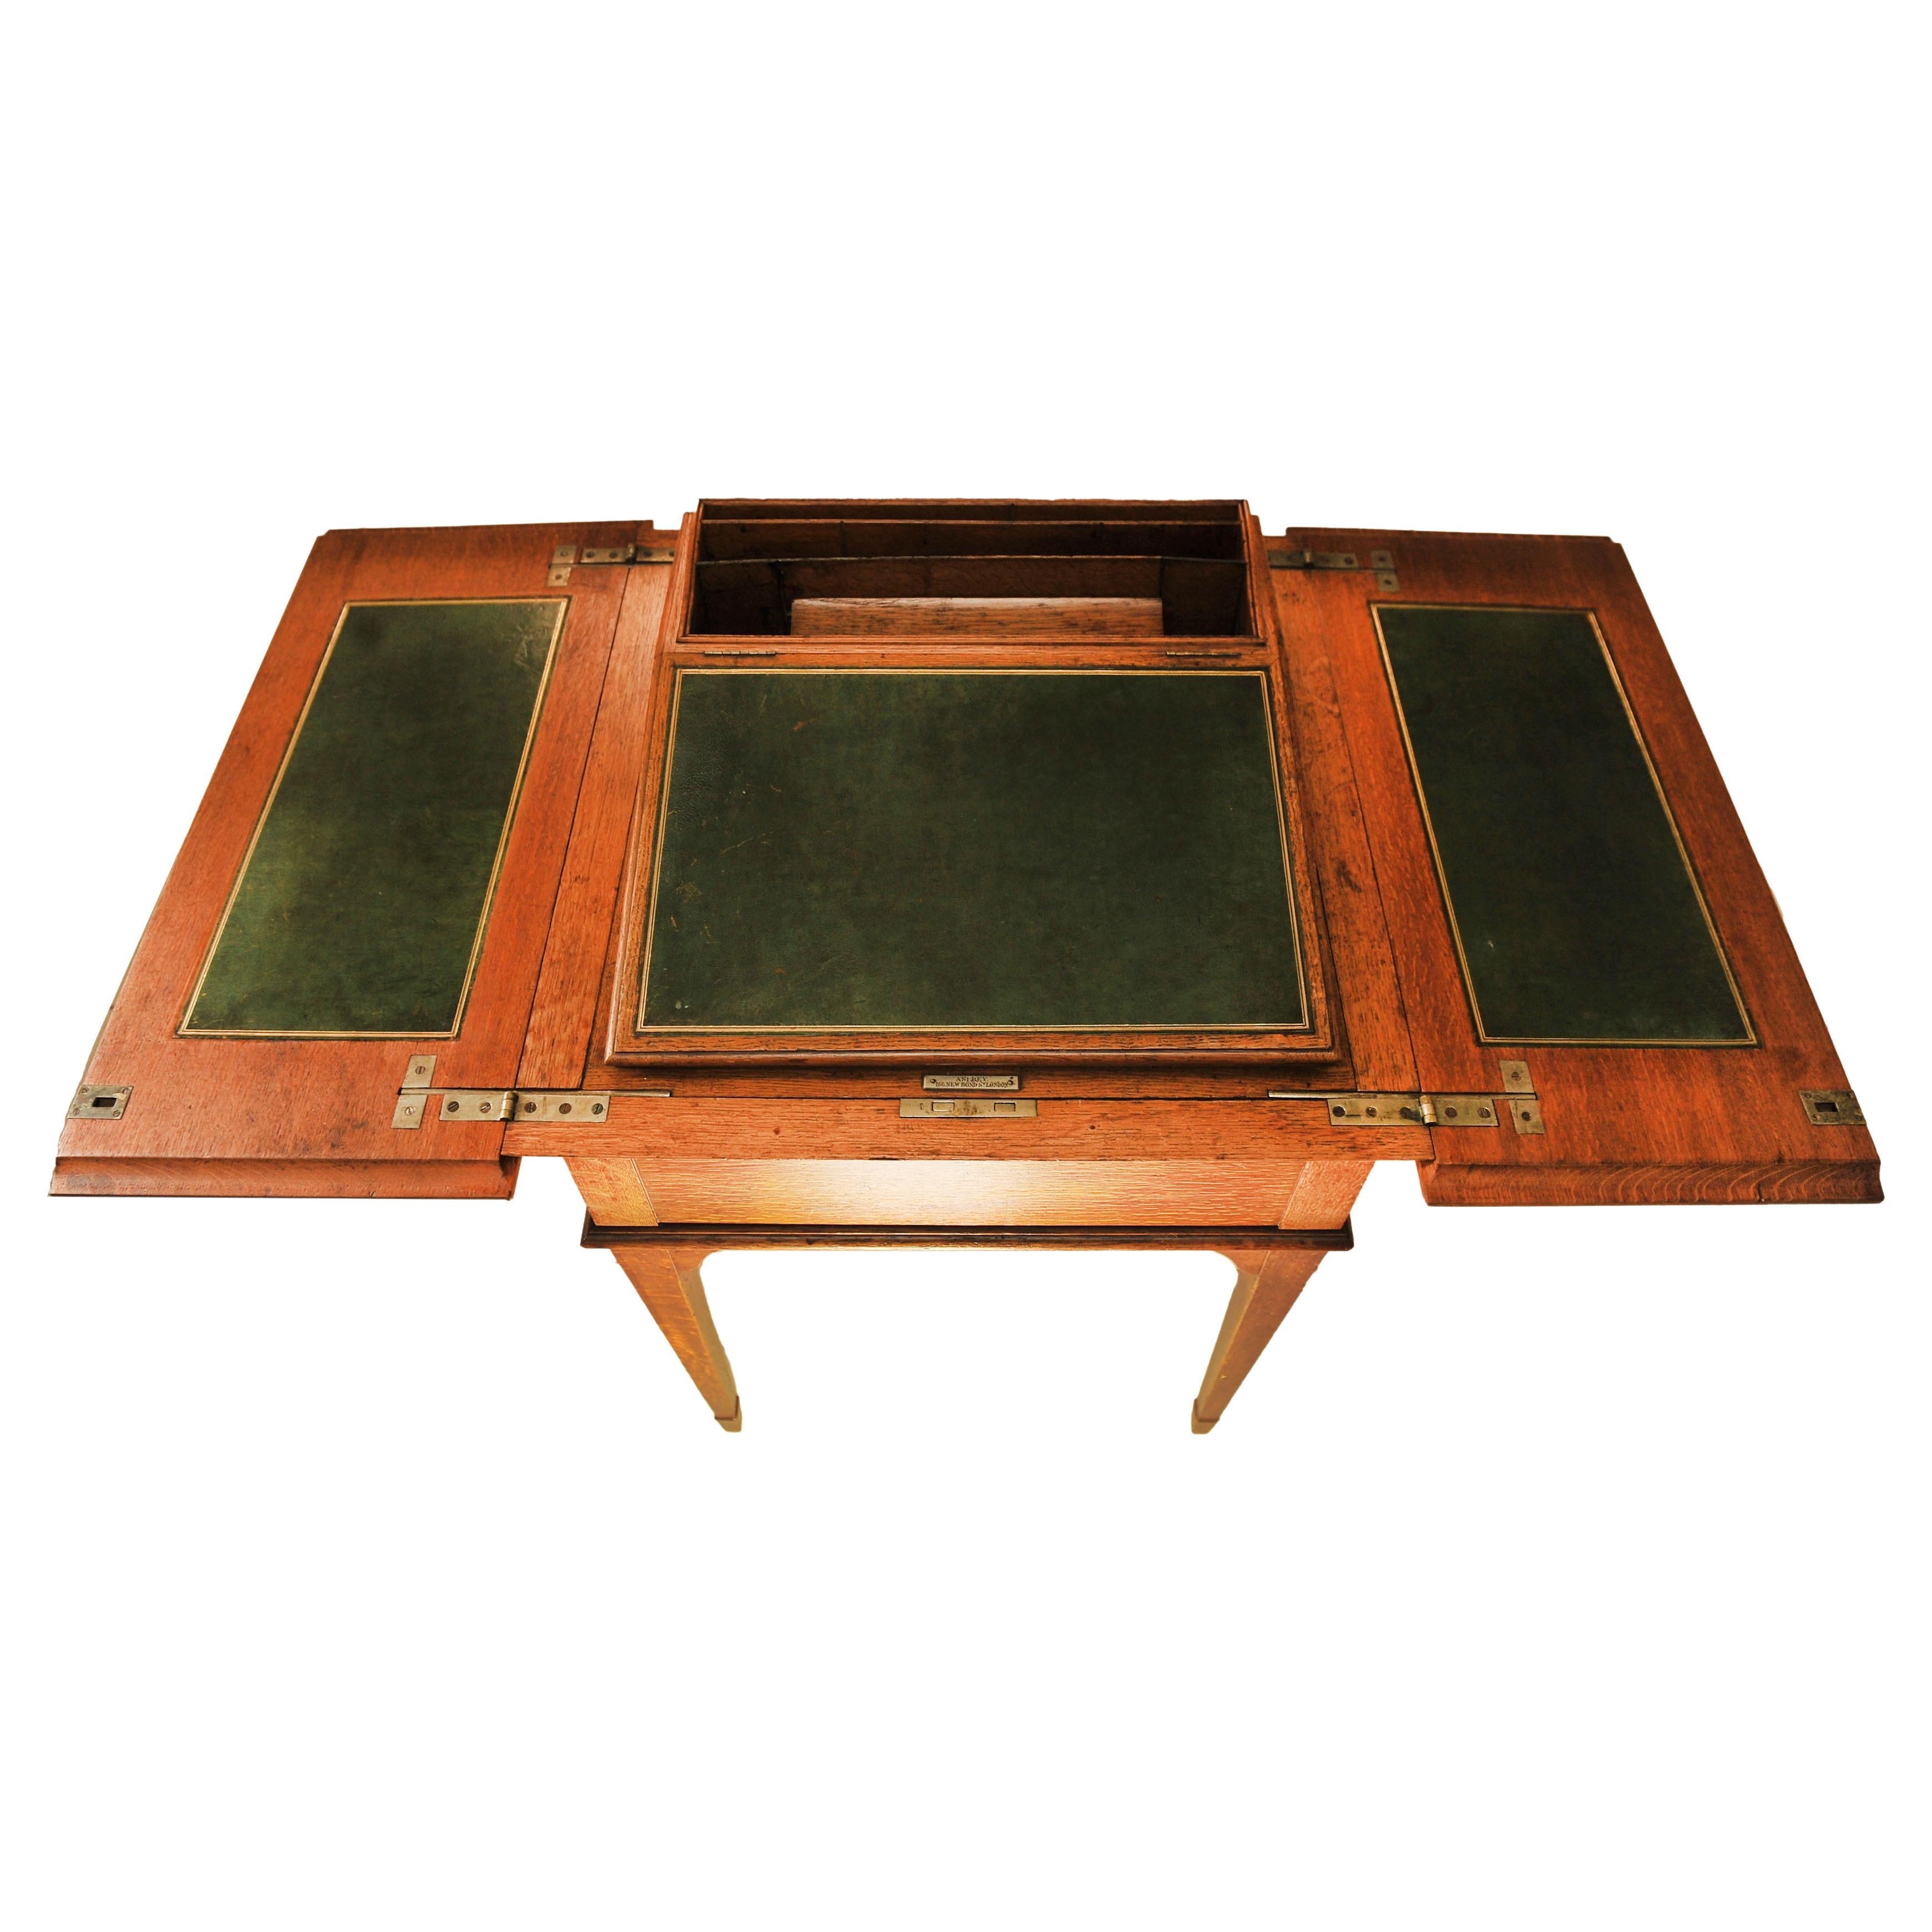 Luxurious, Asprey & Co. London (Royal Warrant) Oak & Tooled Racing Green Leather Pop-Up Writing Table Made in England in the 1920s.

Item is sold complete with a Burgundy tooled red leather desk set also from Aspreys. It's a very attractive item